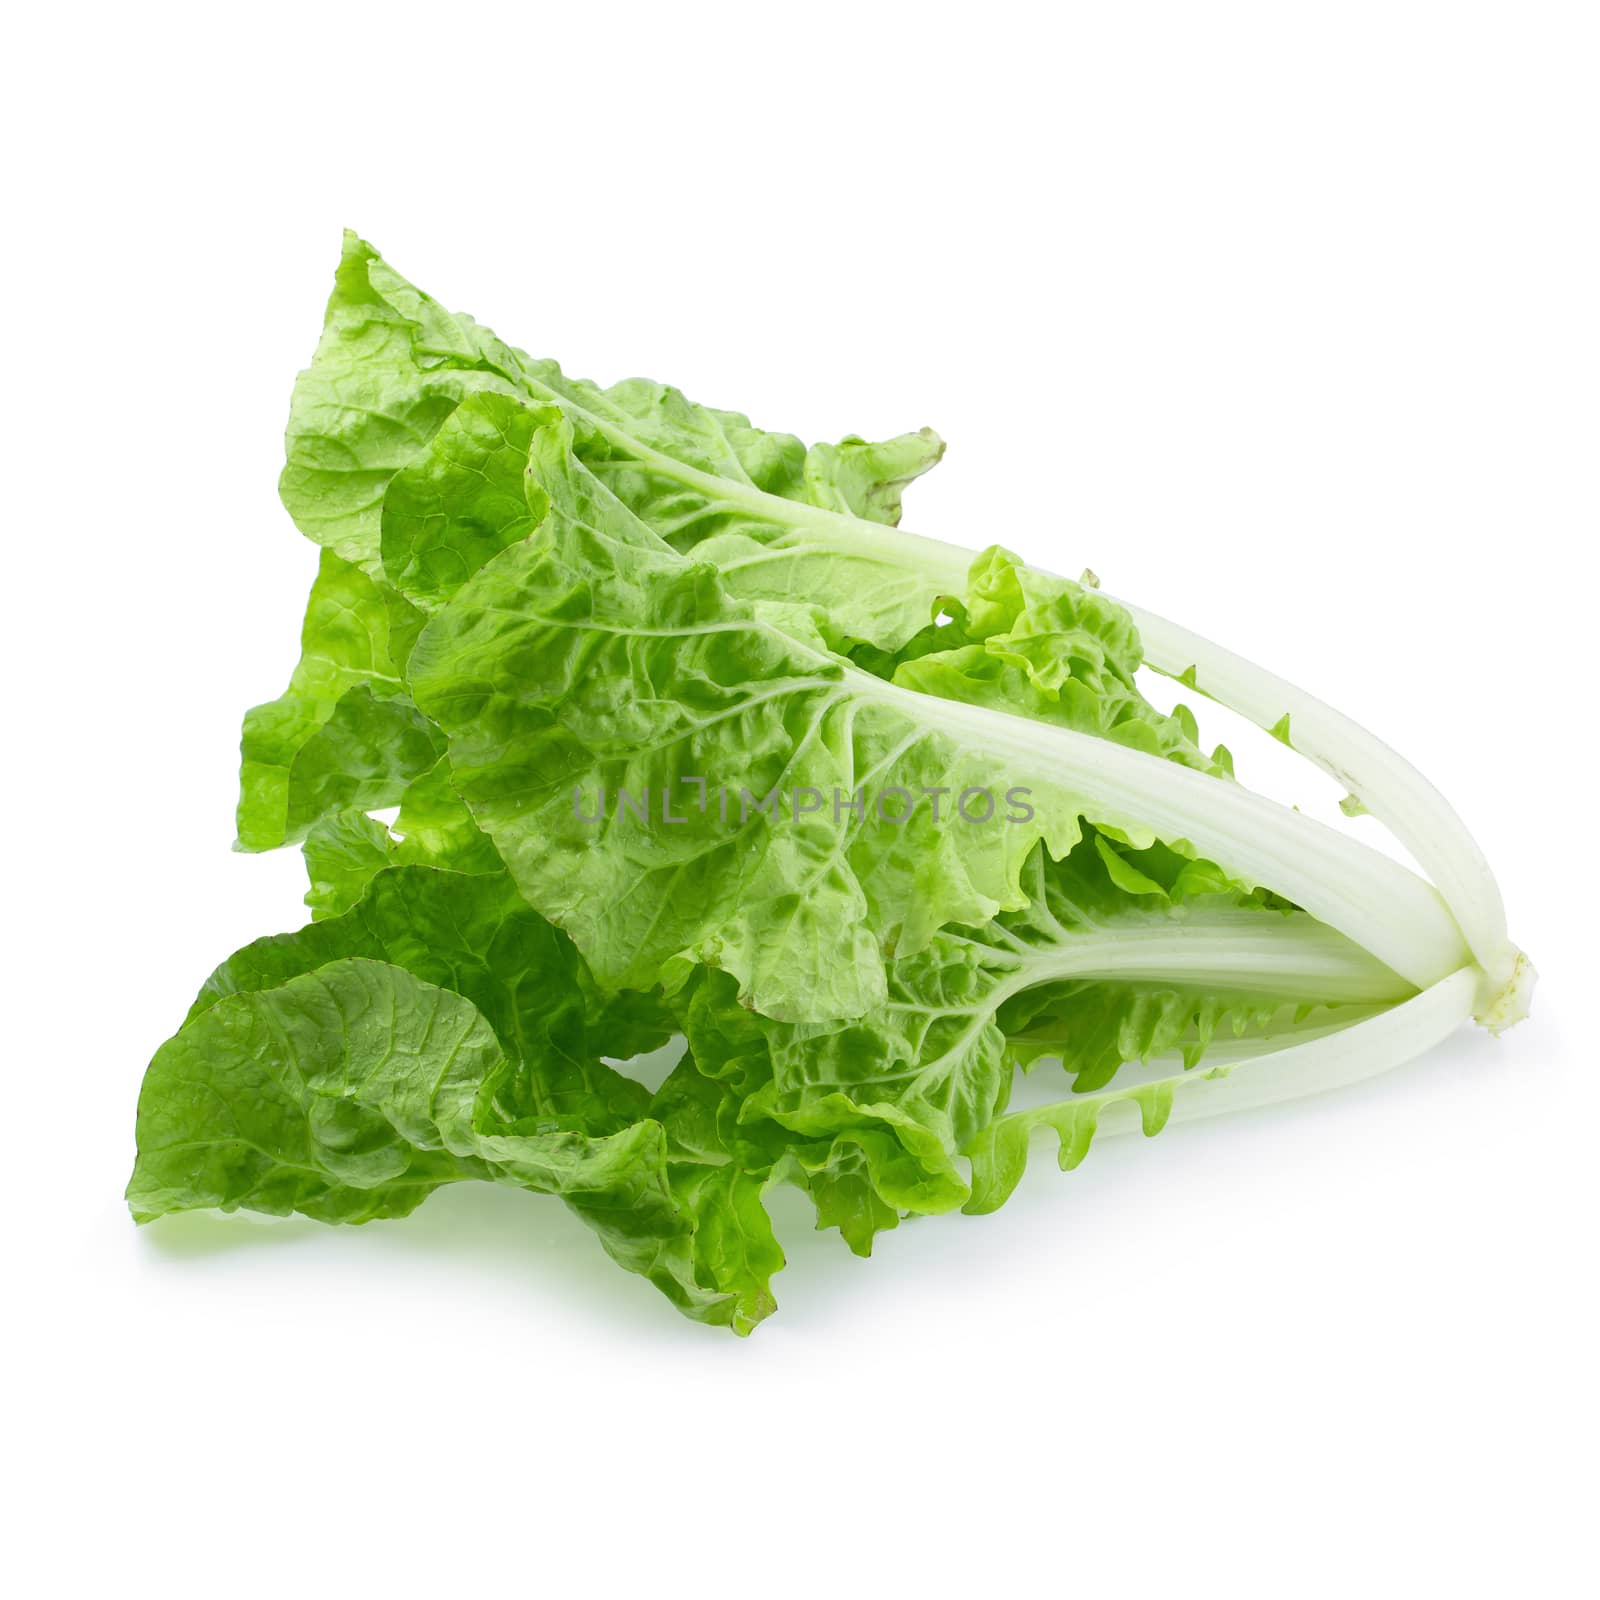 Lettuce leaves isolated on a white background by kaiskynet